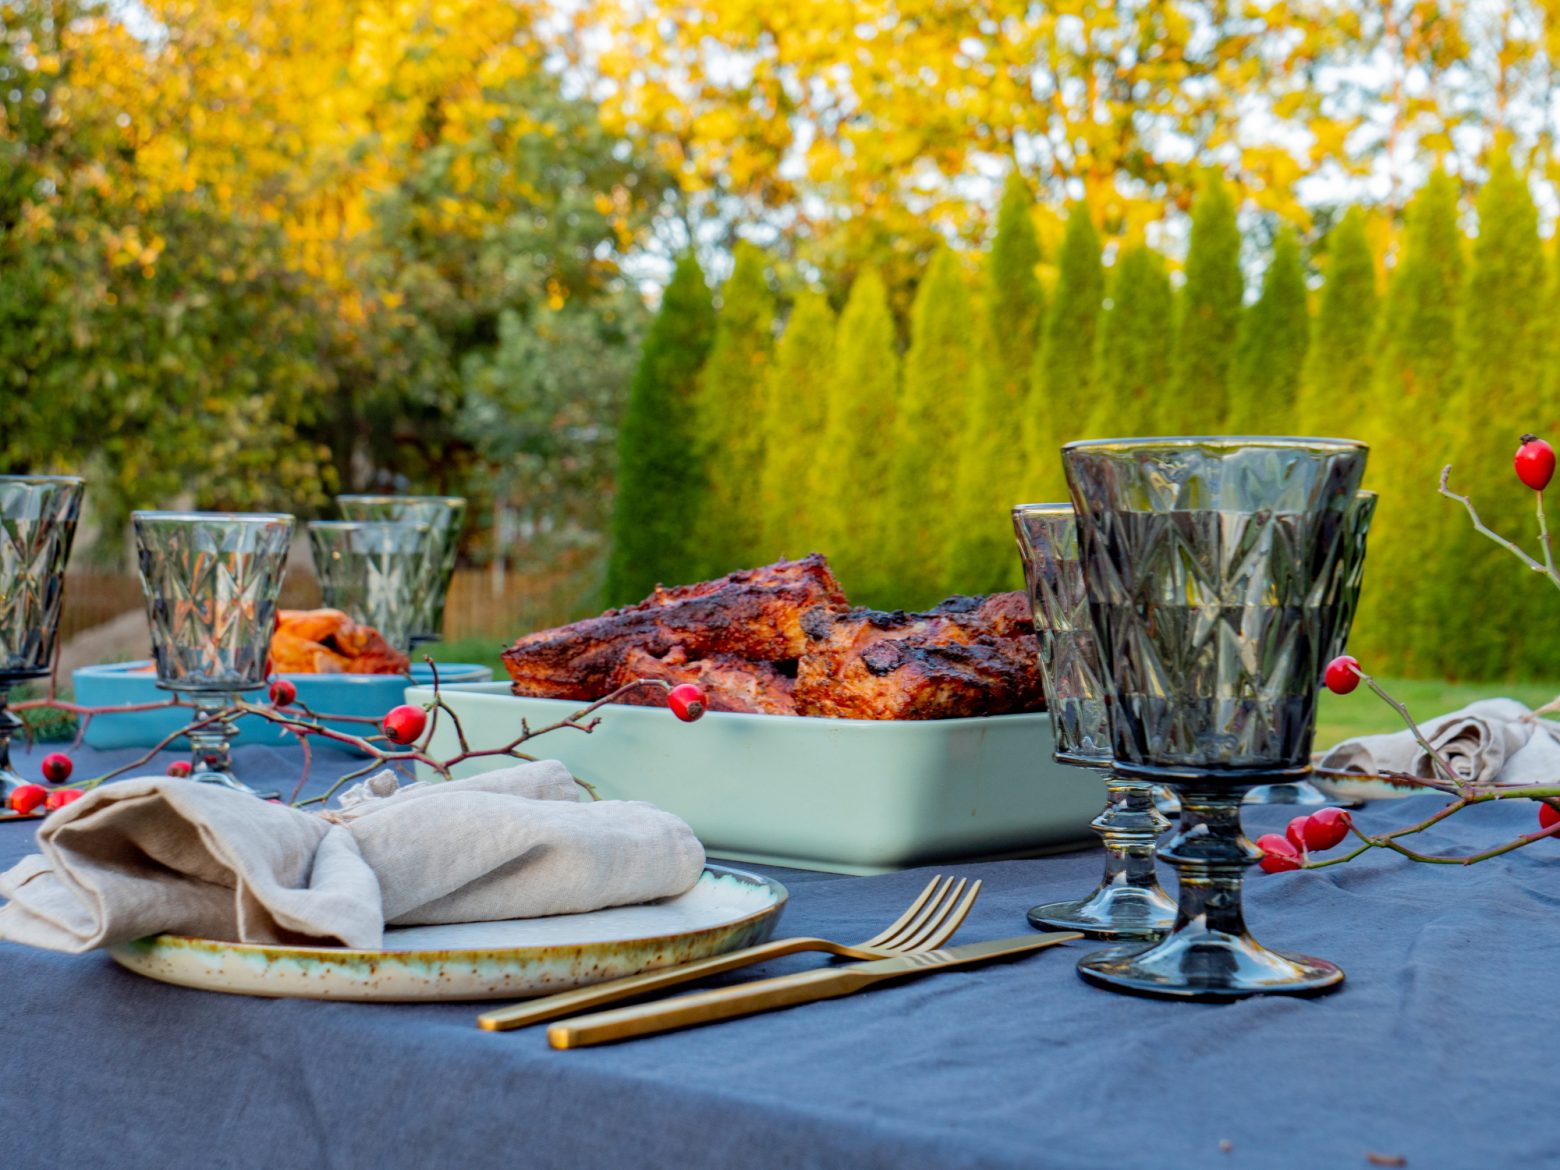 What Are the Best and Creative Outdoor Dining Table Ideas?